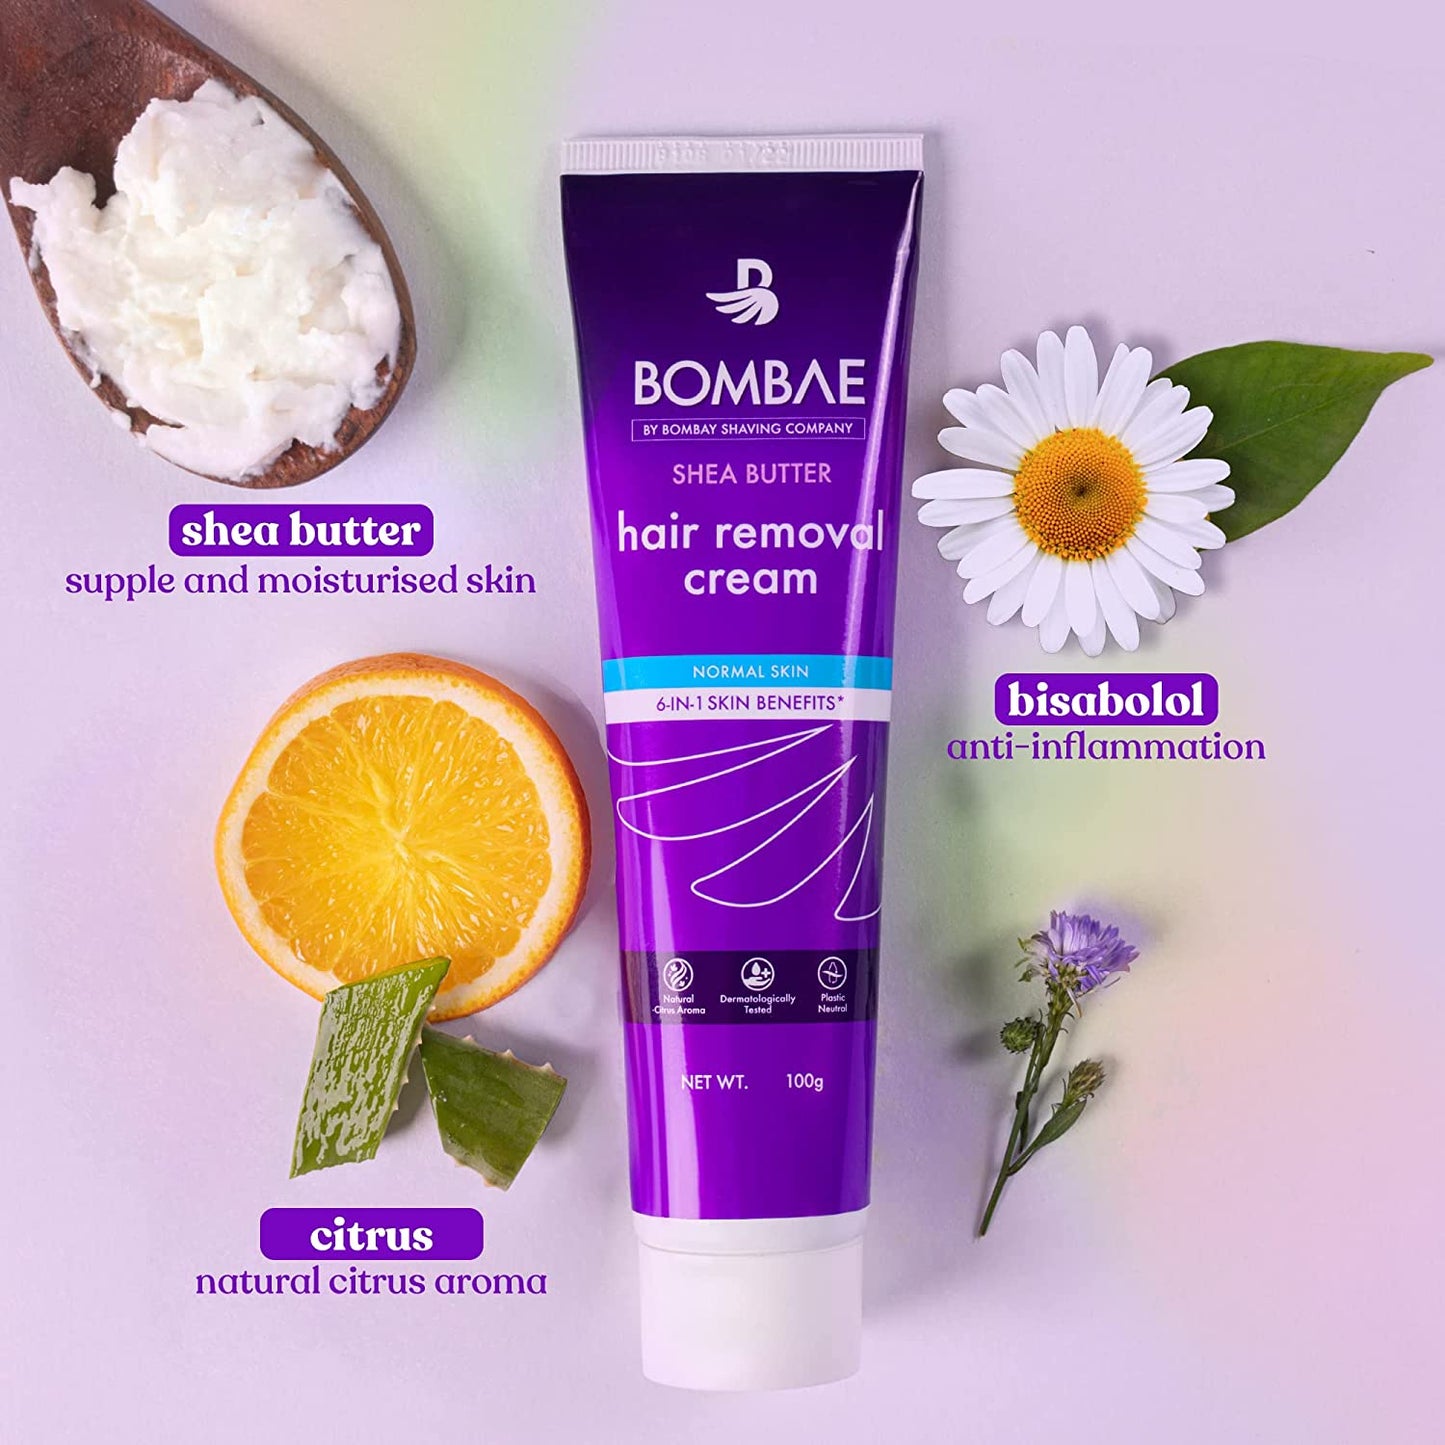 Bombae 6-in-1 Shea Butter Hair Removal Cream For Women - 100 gm